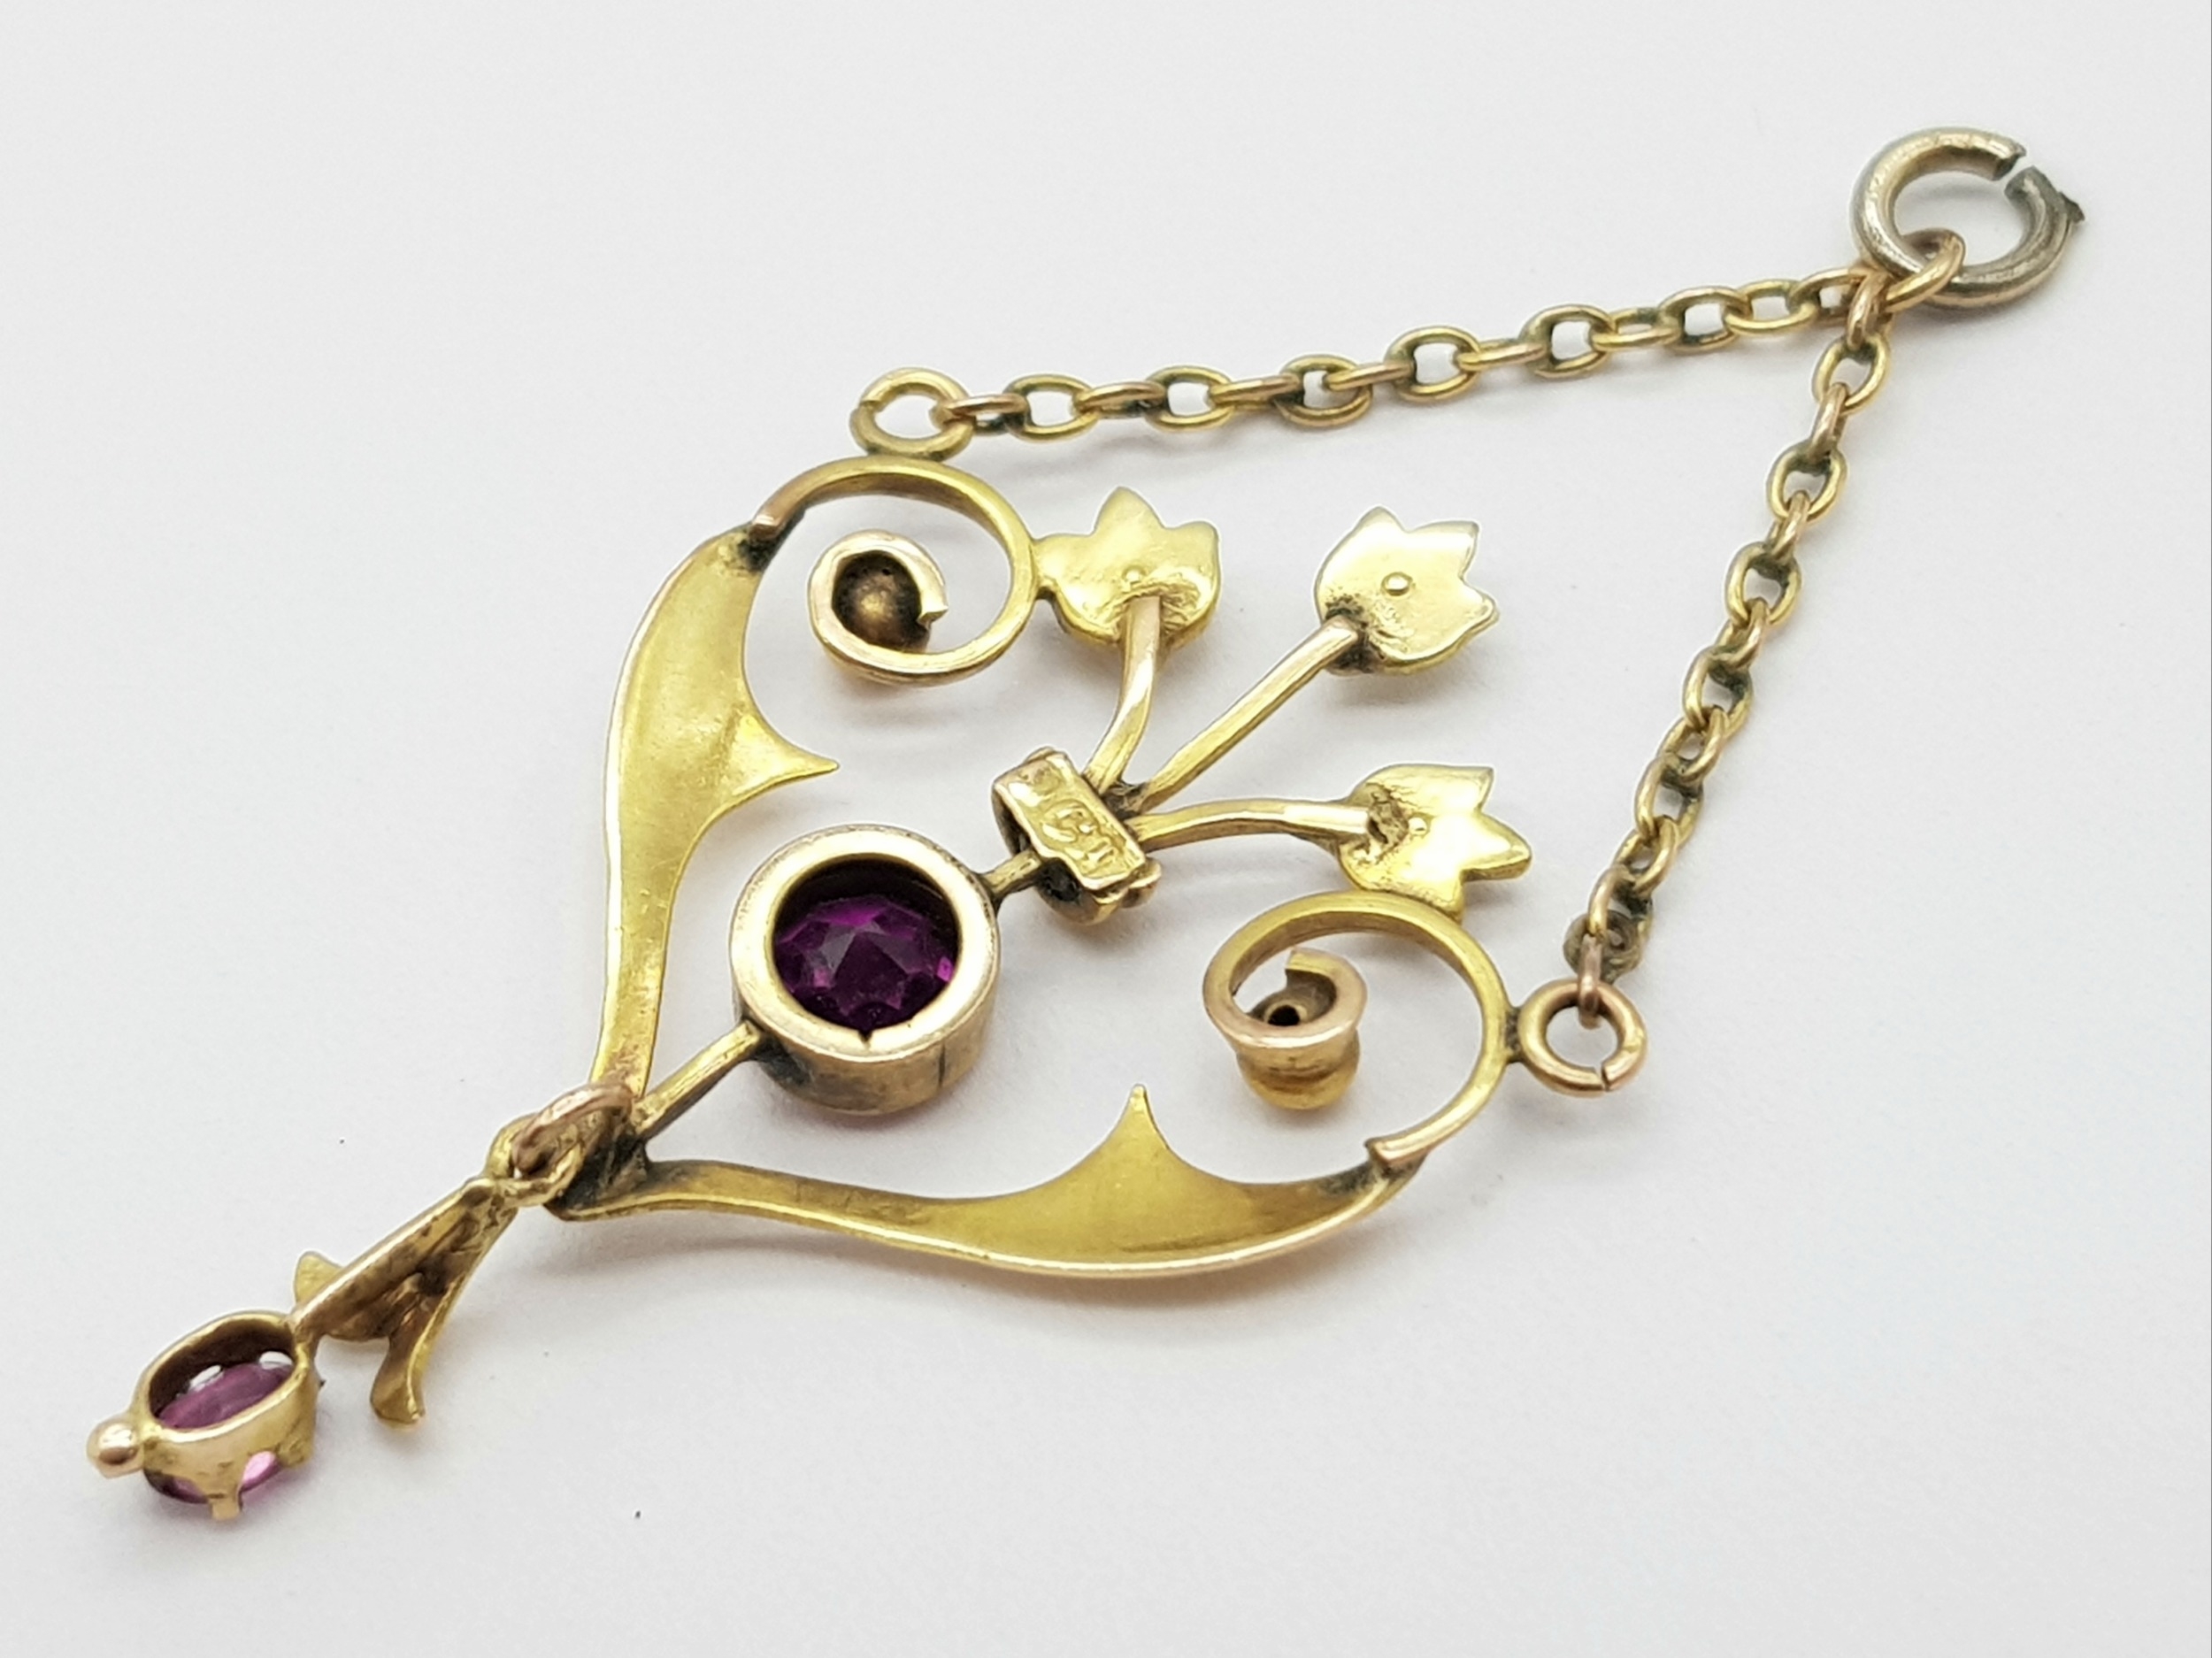 An Antique 9K Yellow Gold Amethyst and Seed Pearl Pendant. Beautiful floral design. 5cm. 1.8g - Image 2 of 5